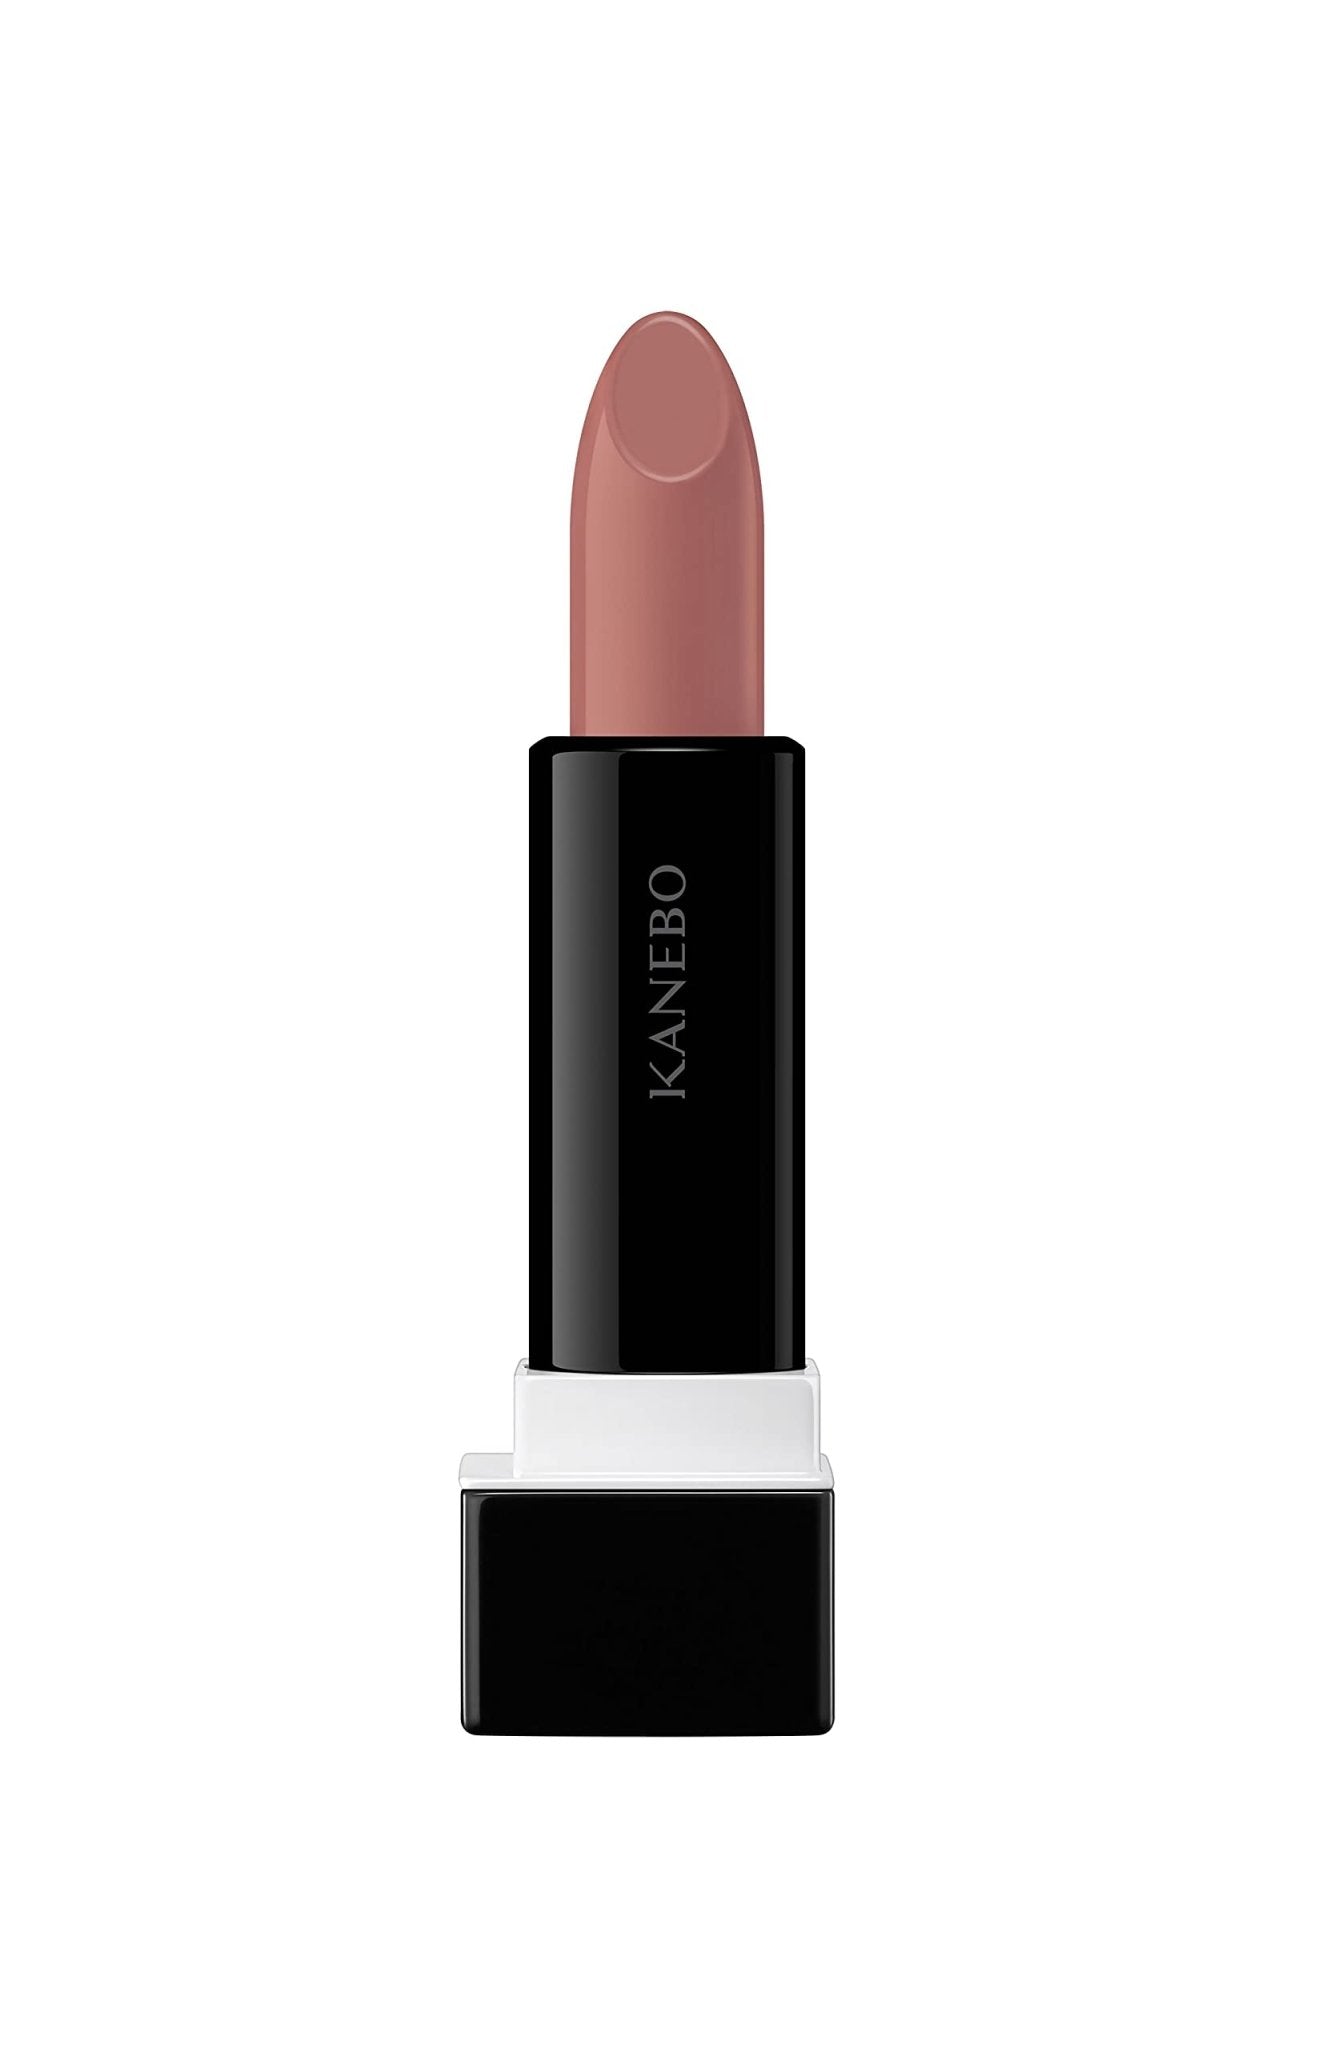 Kanebo N - Rouge Lipstick Raw Red 161 3.3G - Perfect Shade for Classic Look